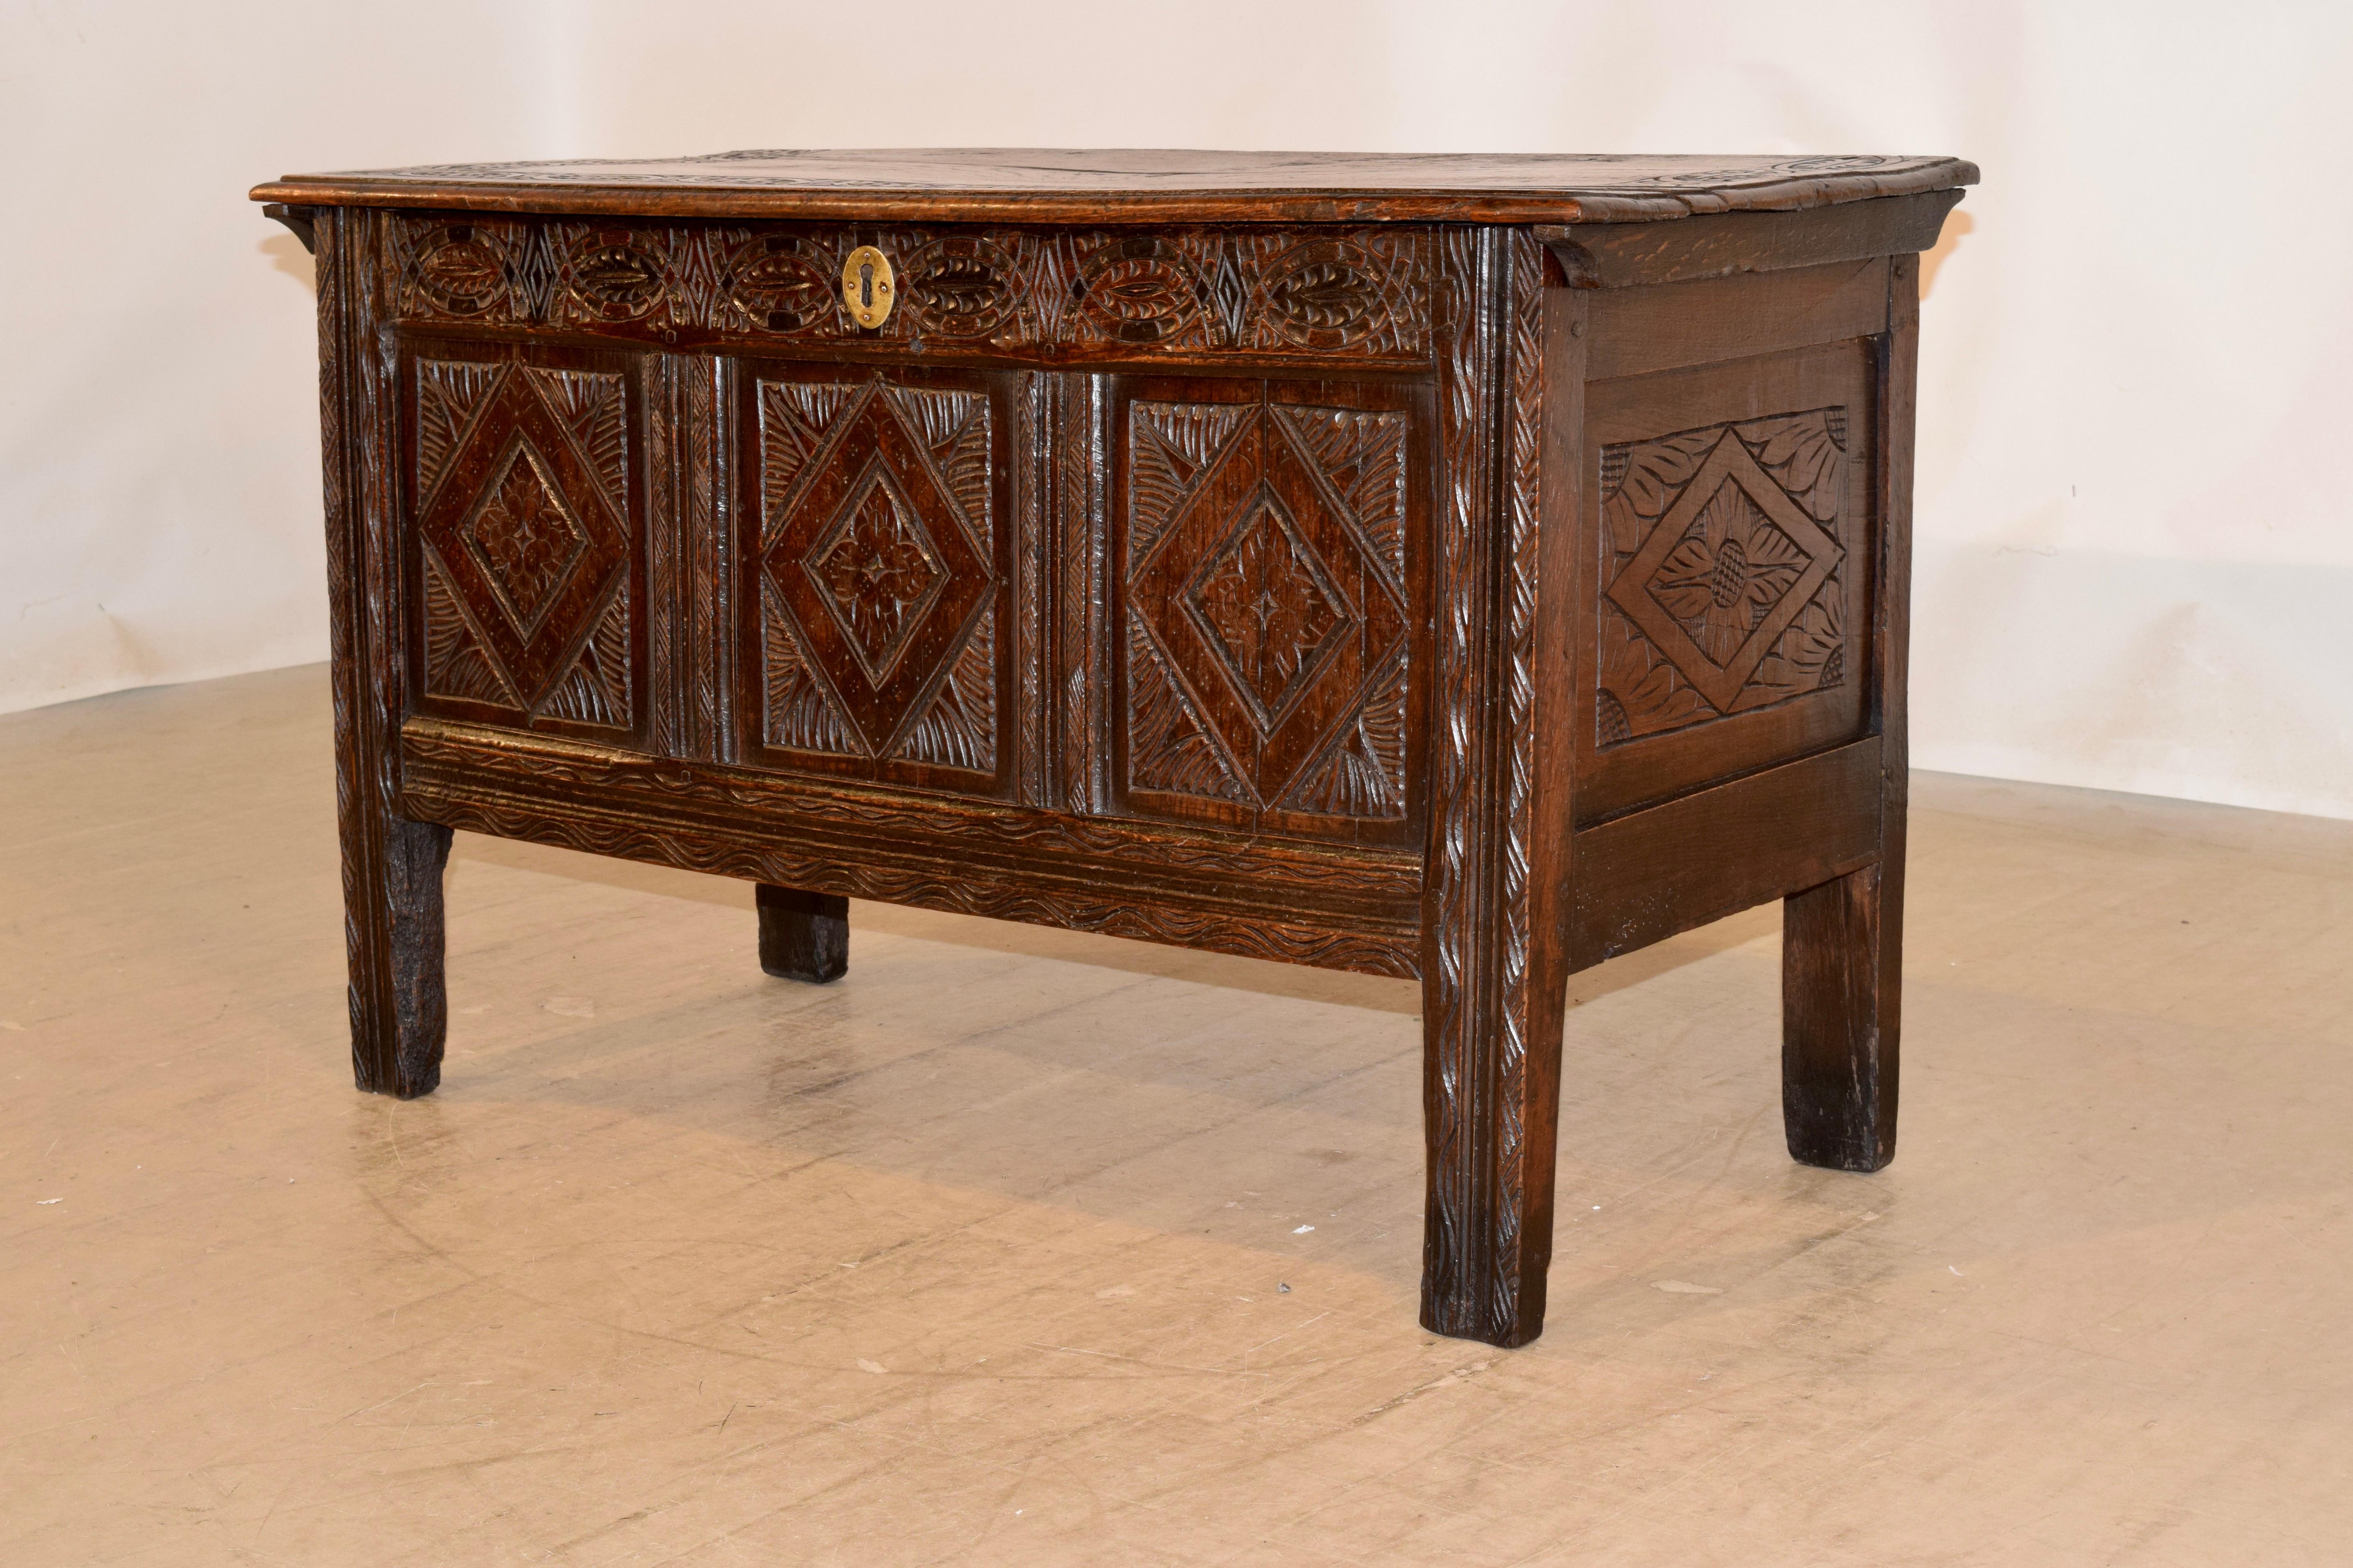 English Late 17th-Early 18th Century Carved Blanket Chest For Sale